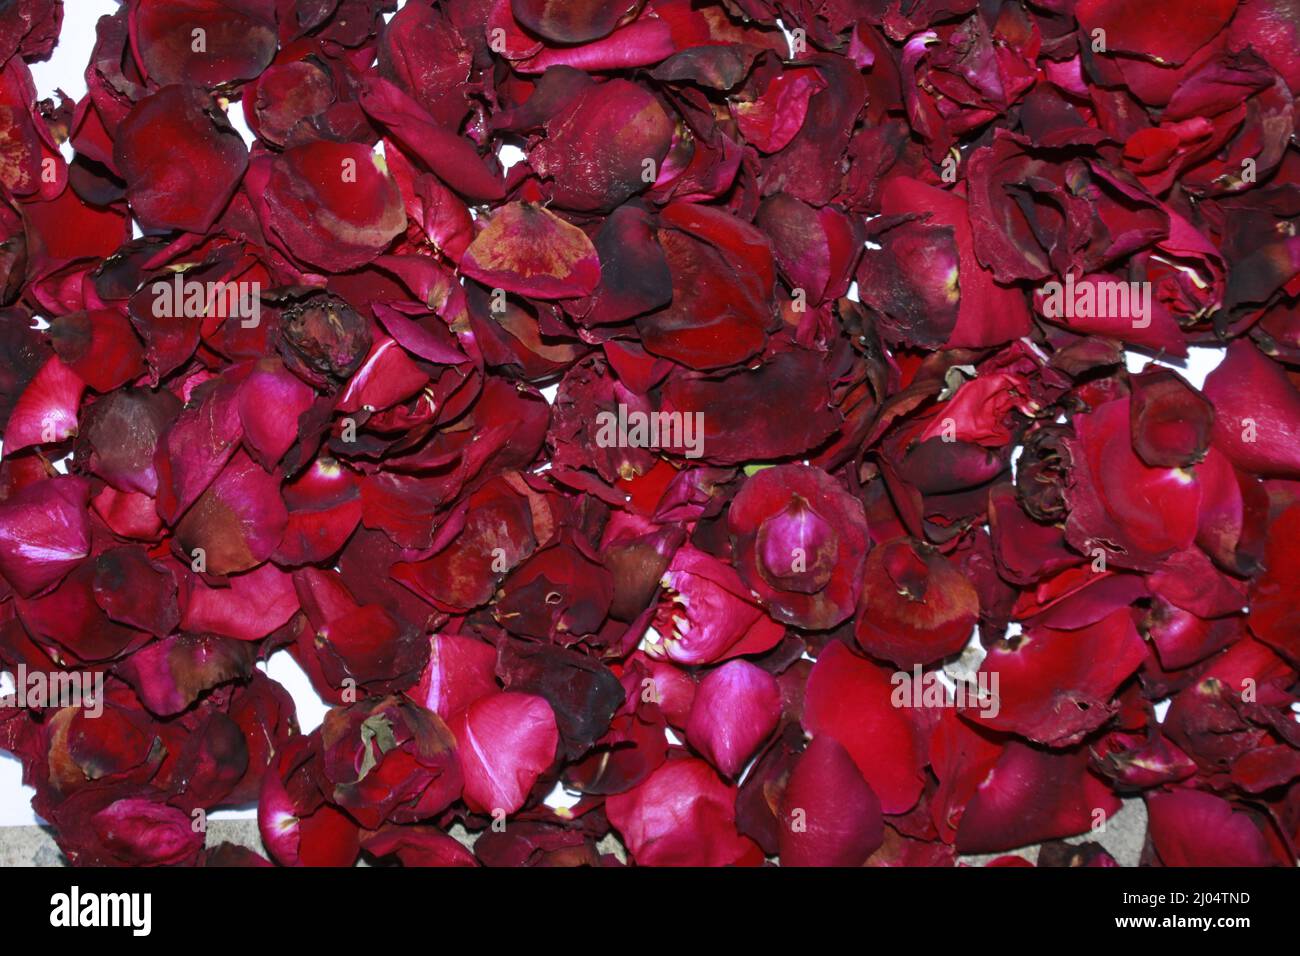 Dark red dried rose fragrant petals close up, Dark red dried rose flower on dry fragrant petals soft background. Stock Photo